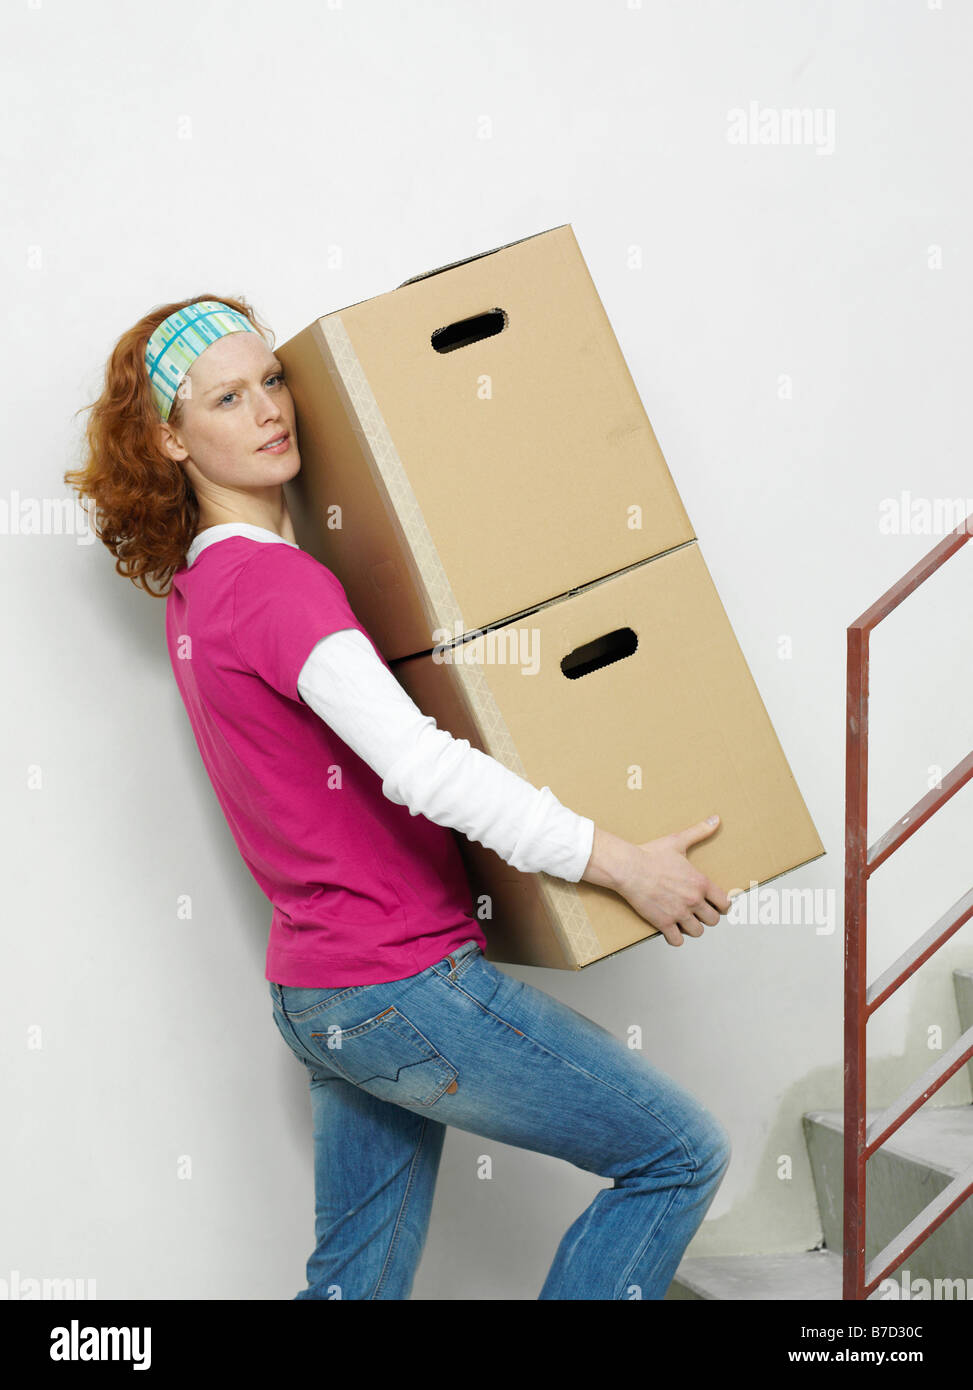 A woman carrying boxes up stairs Stock Photo - Alamy